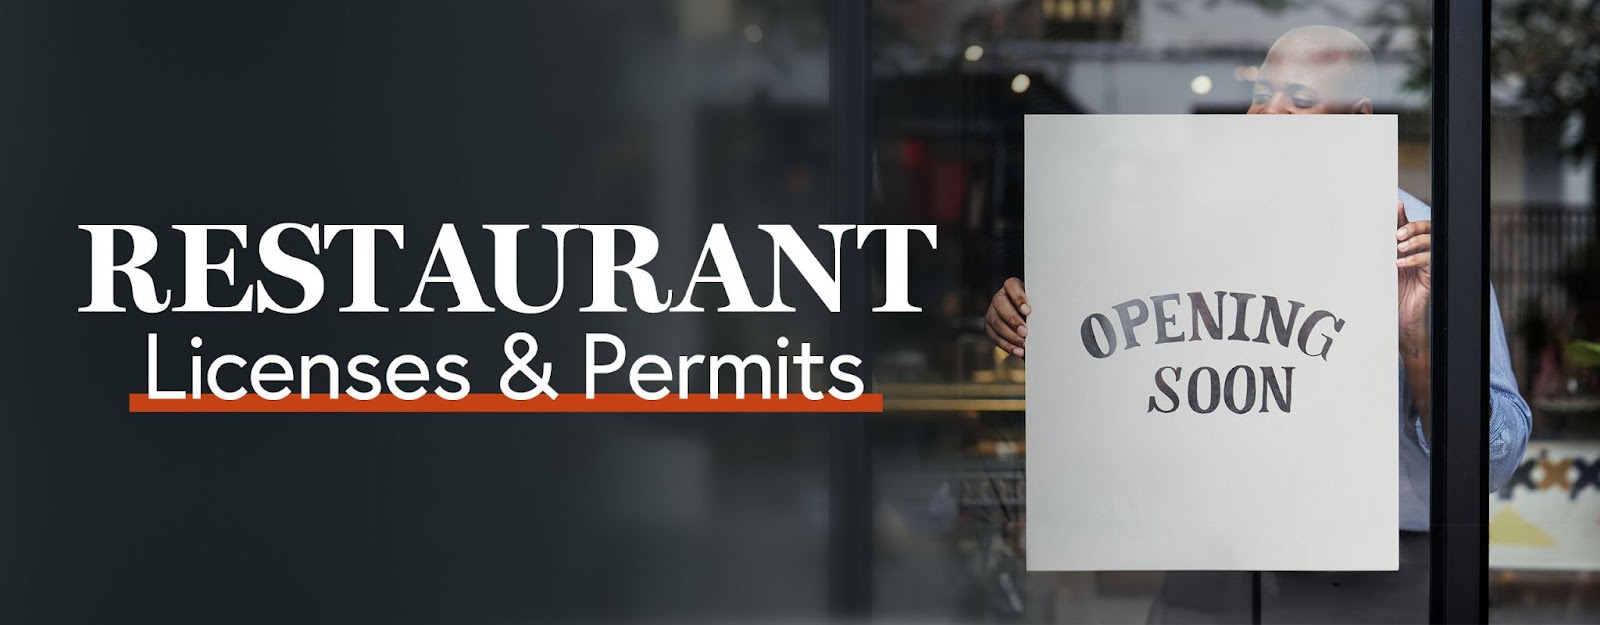 laws and regulations for restaurants